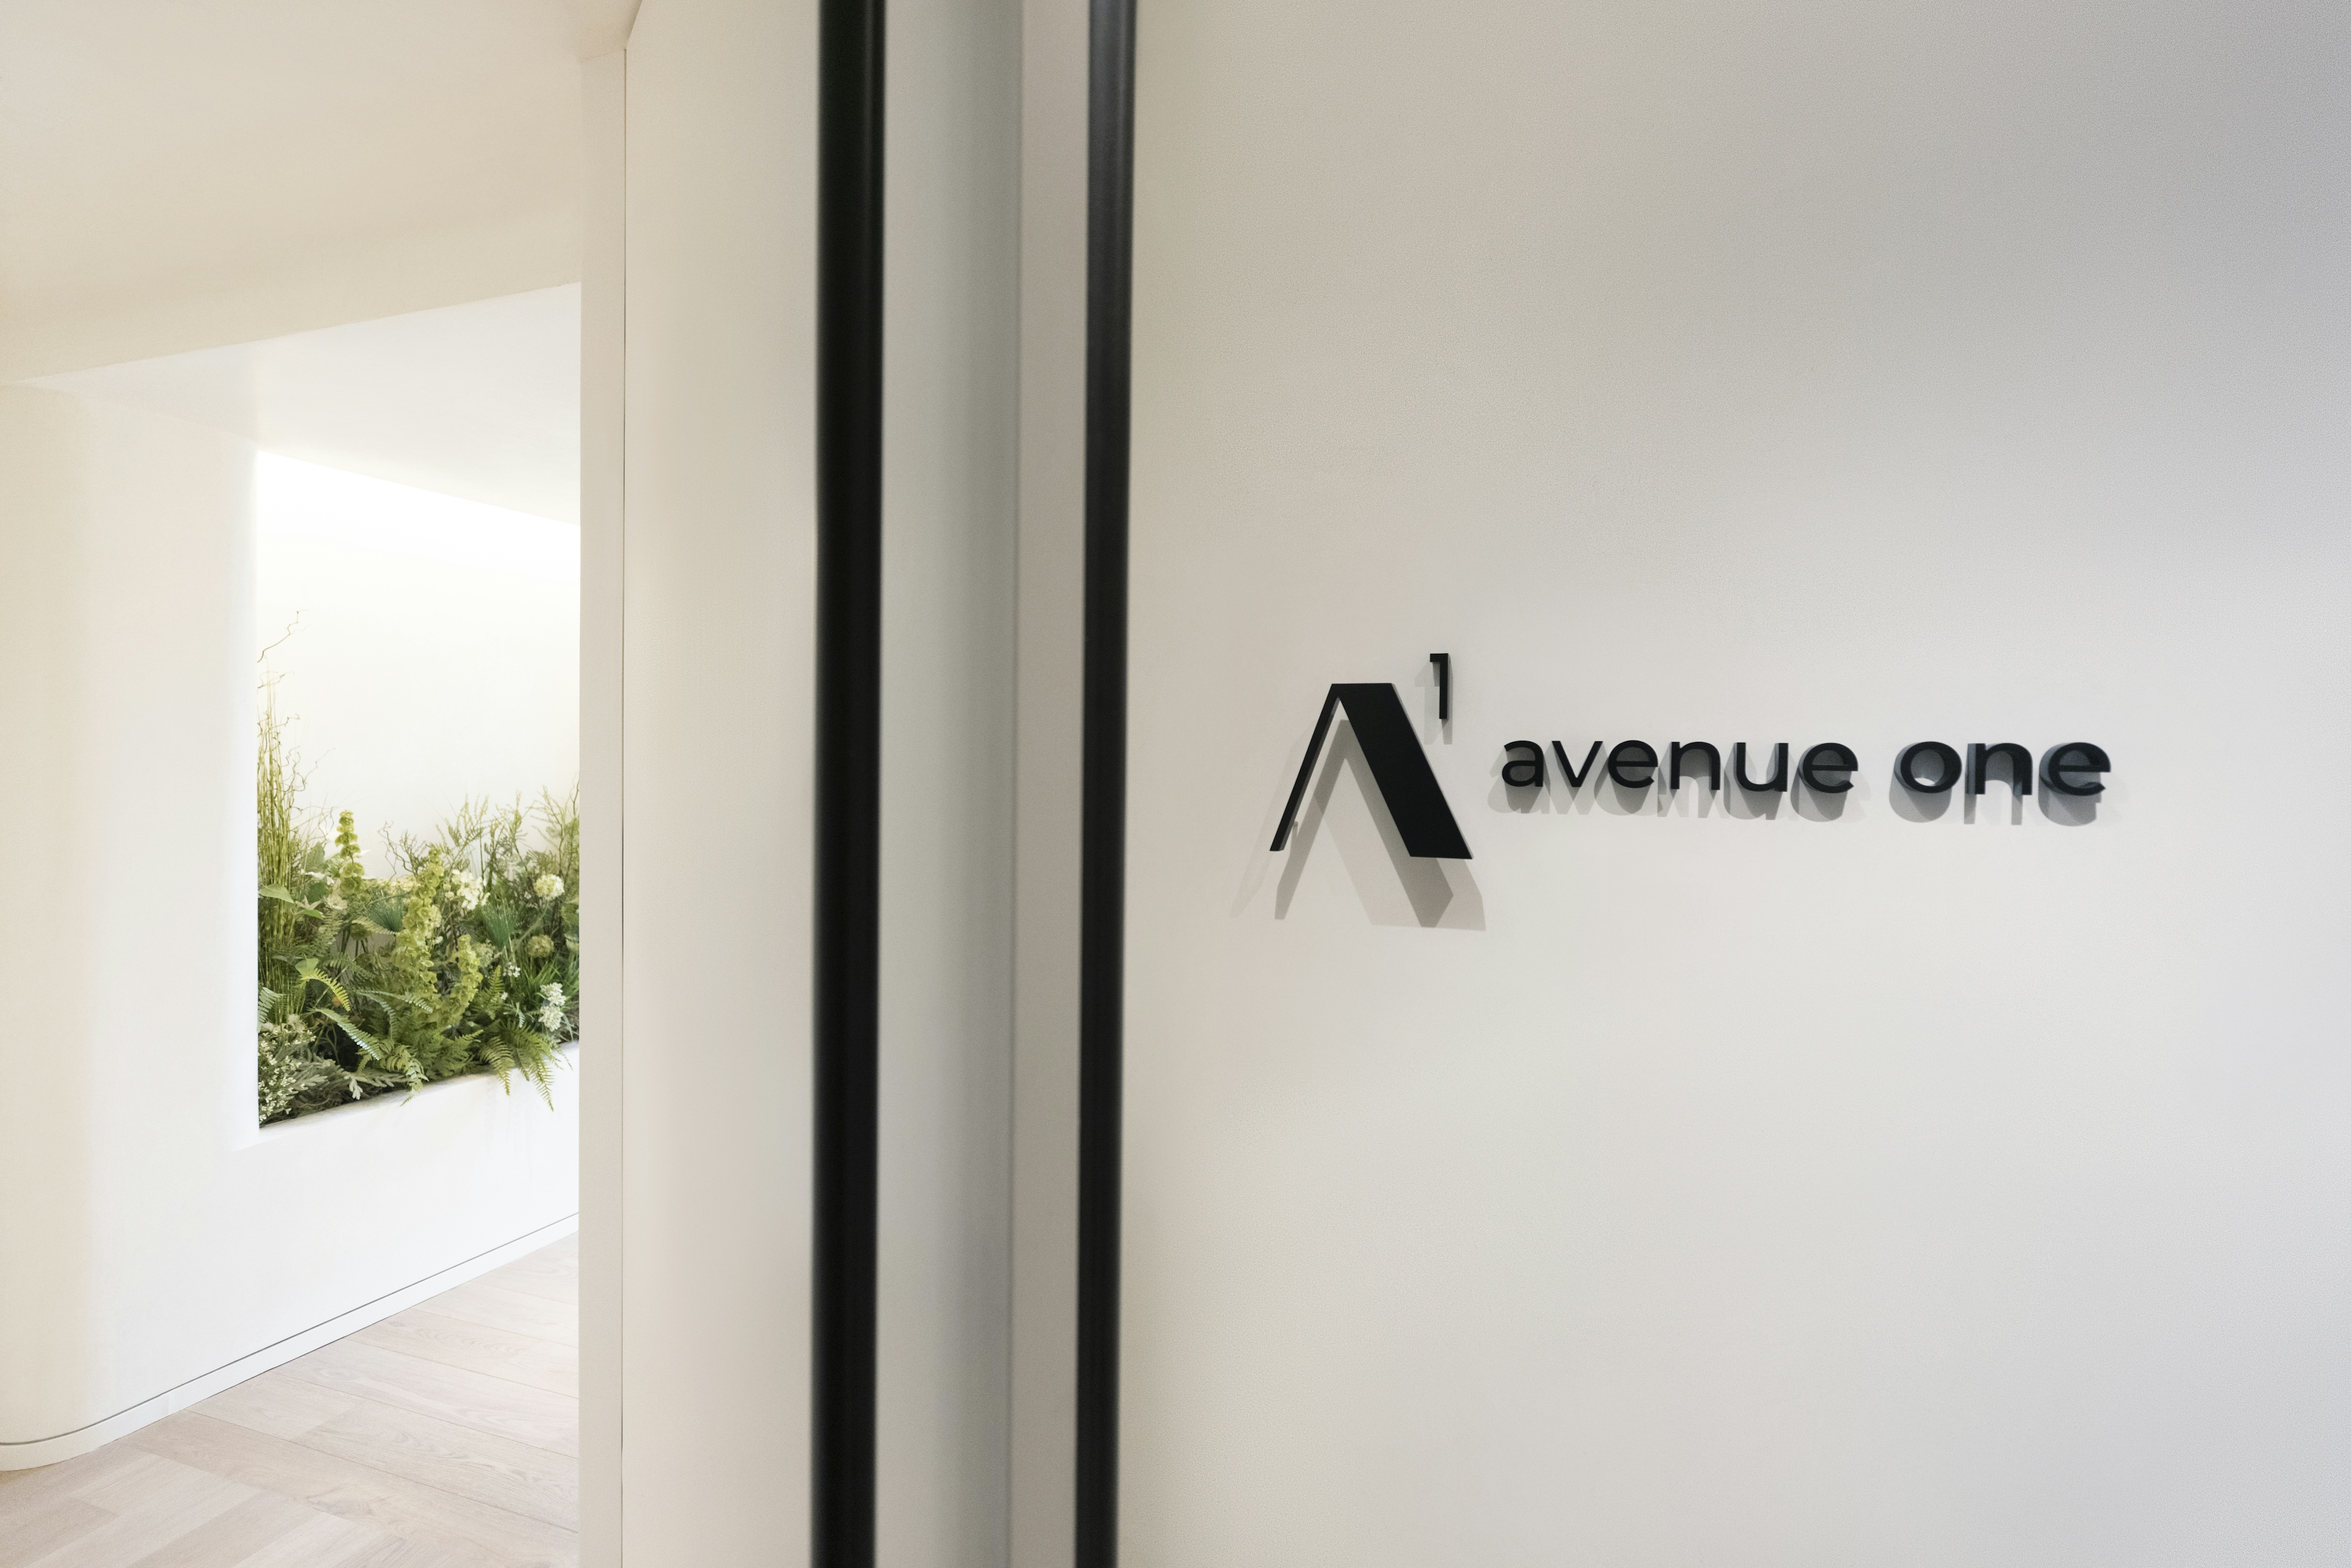 Photo of the the entrance to the avenue one office. White door with the avenue one logo on the connecting wall